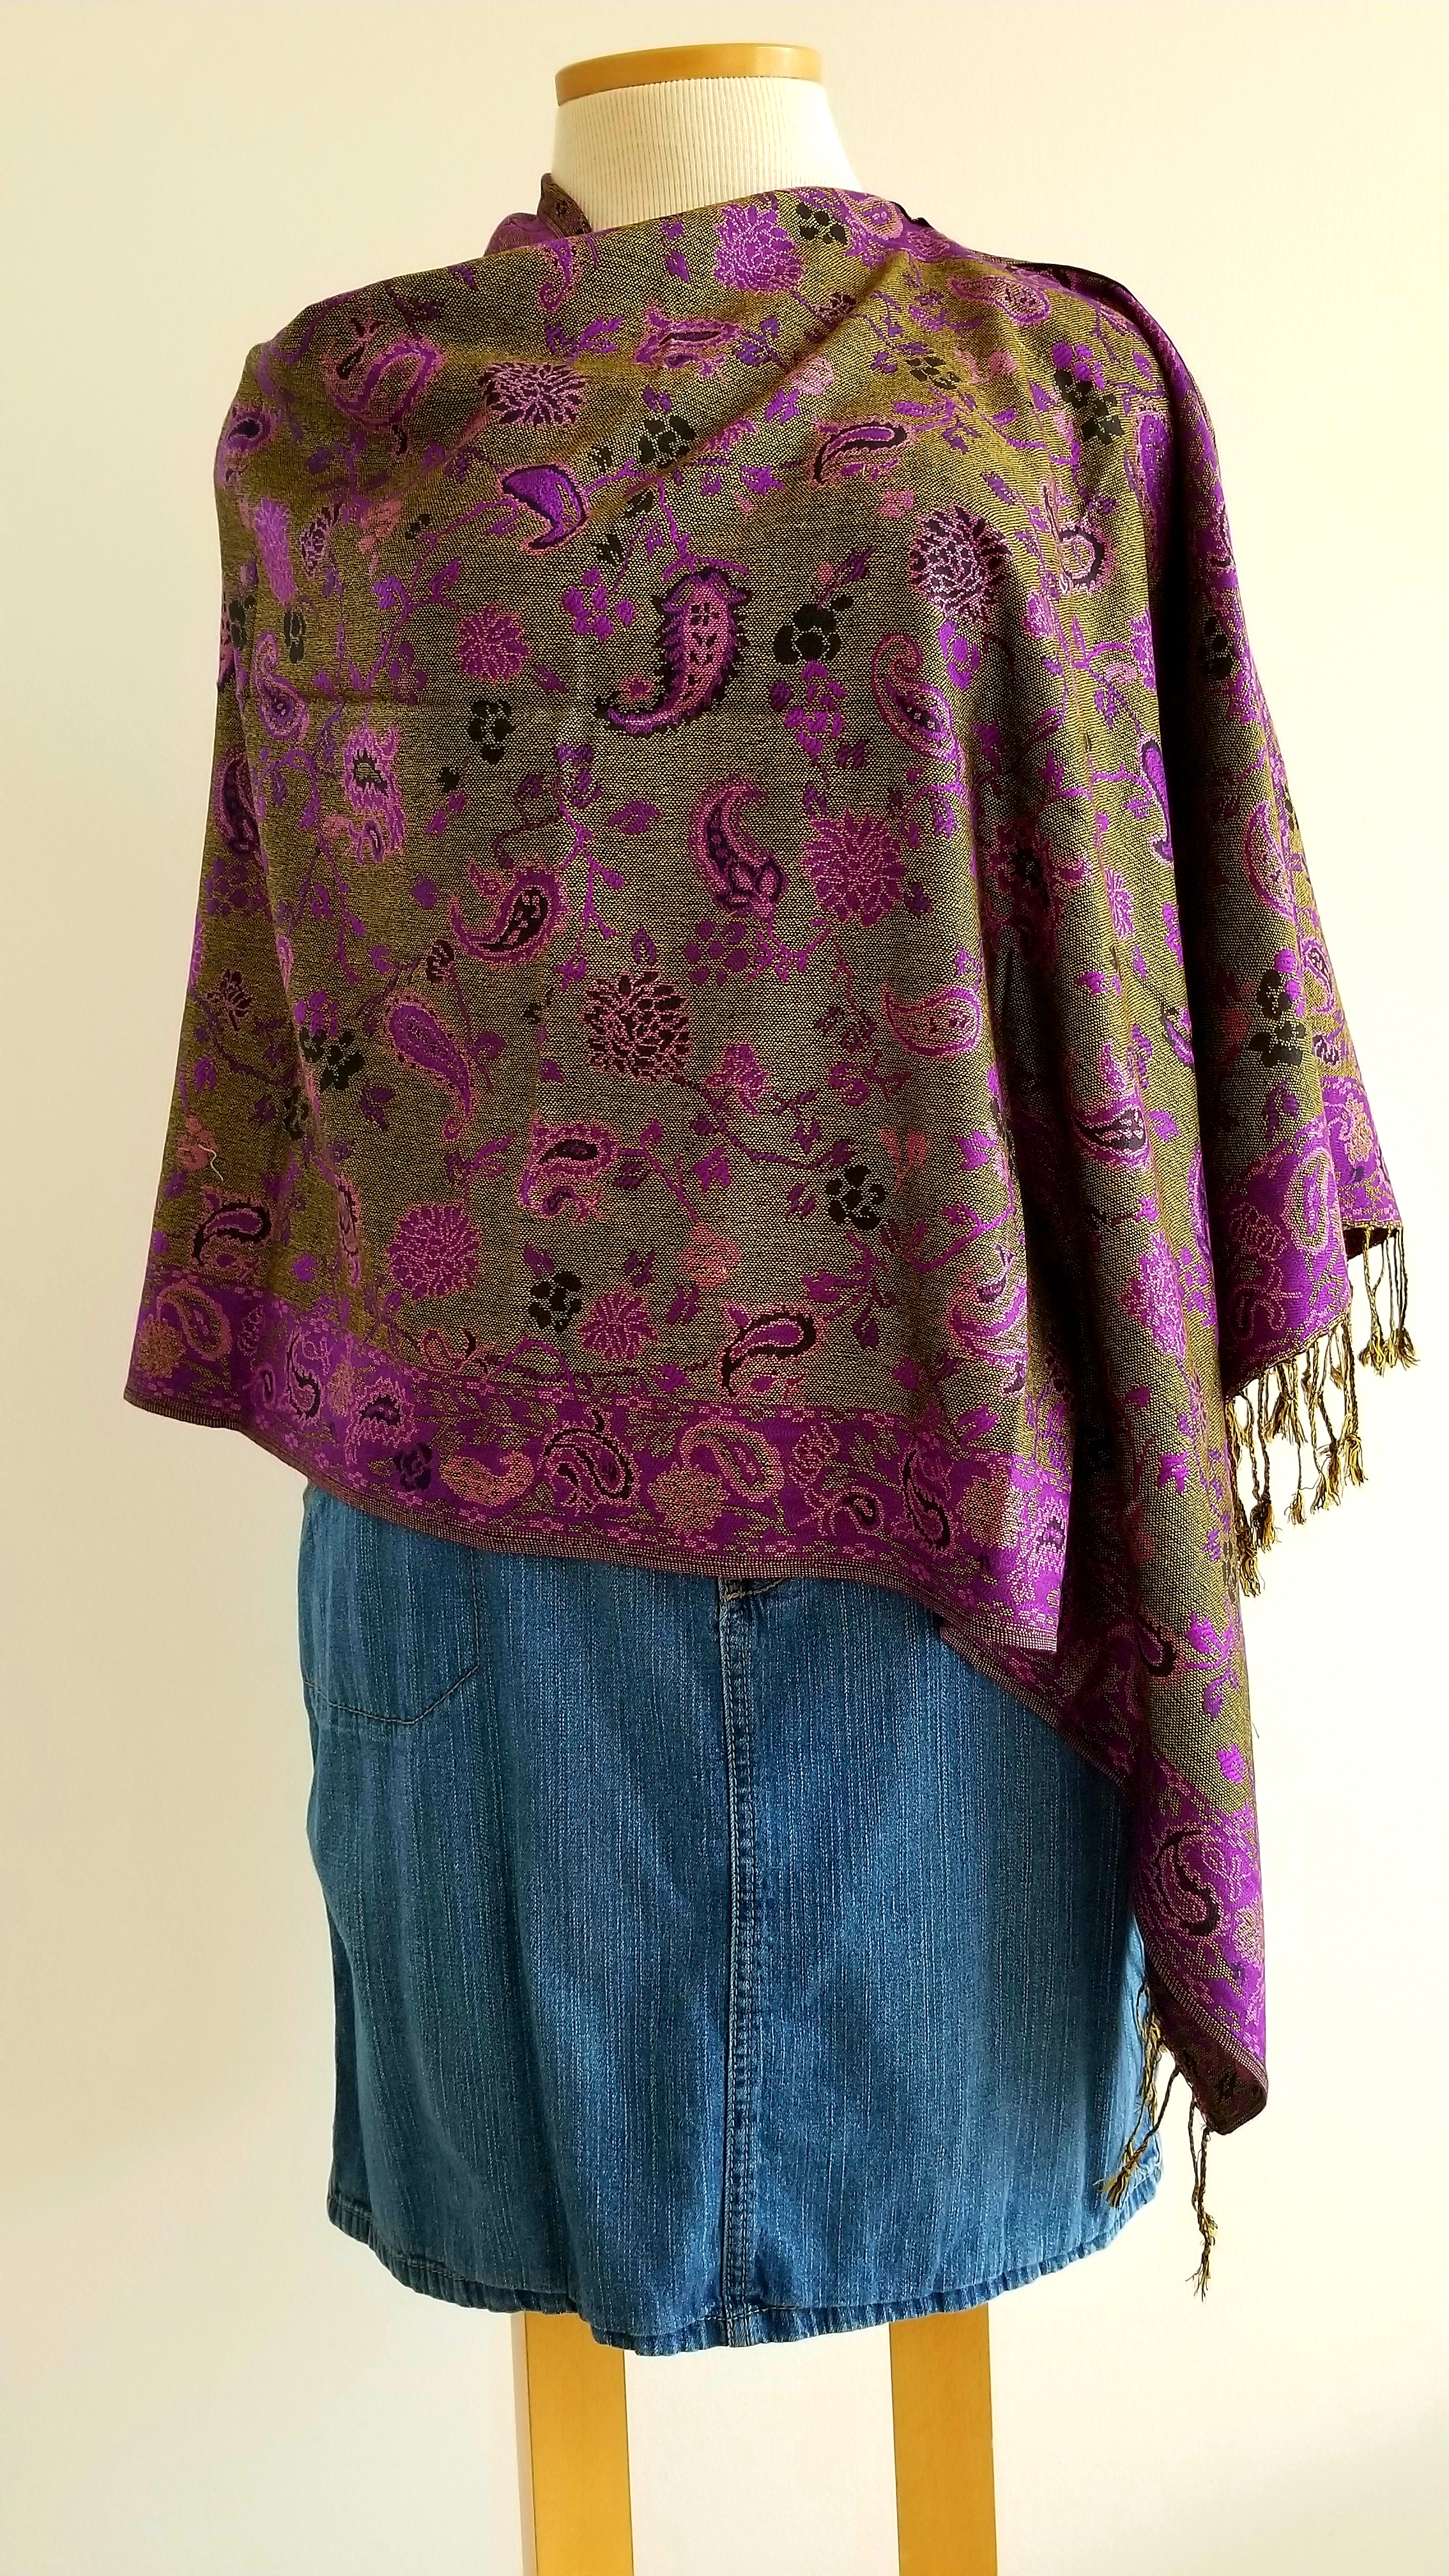 This Purple / Black / Gold Paisley Flower Popover Reversible Shawlmina Shawl- Silk Blend - Fits most is made with love by The Creative Soul Sisters! Shop more unique gift ideas today with Spots Initiatives, the best way to support creators.